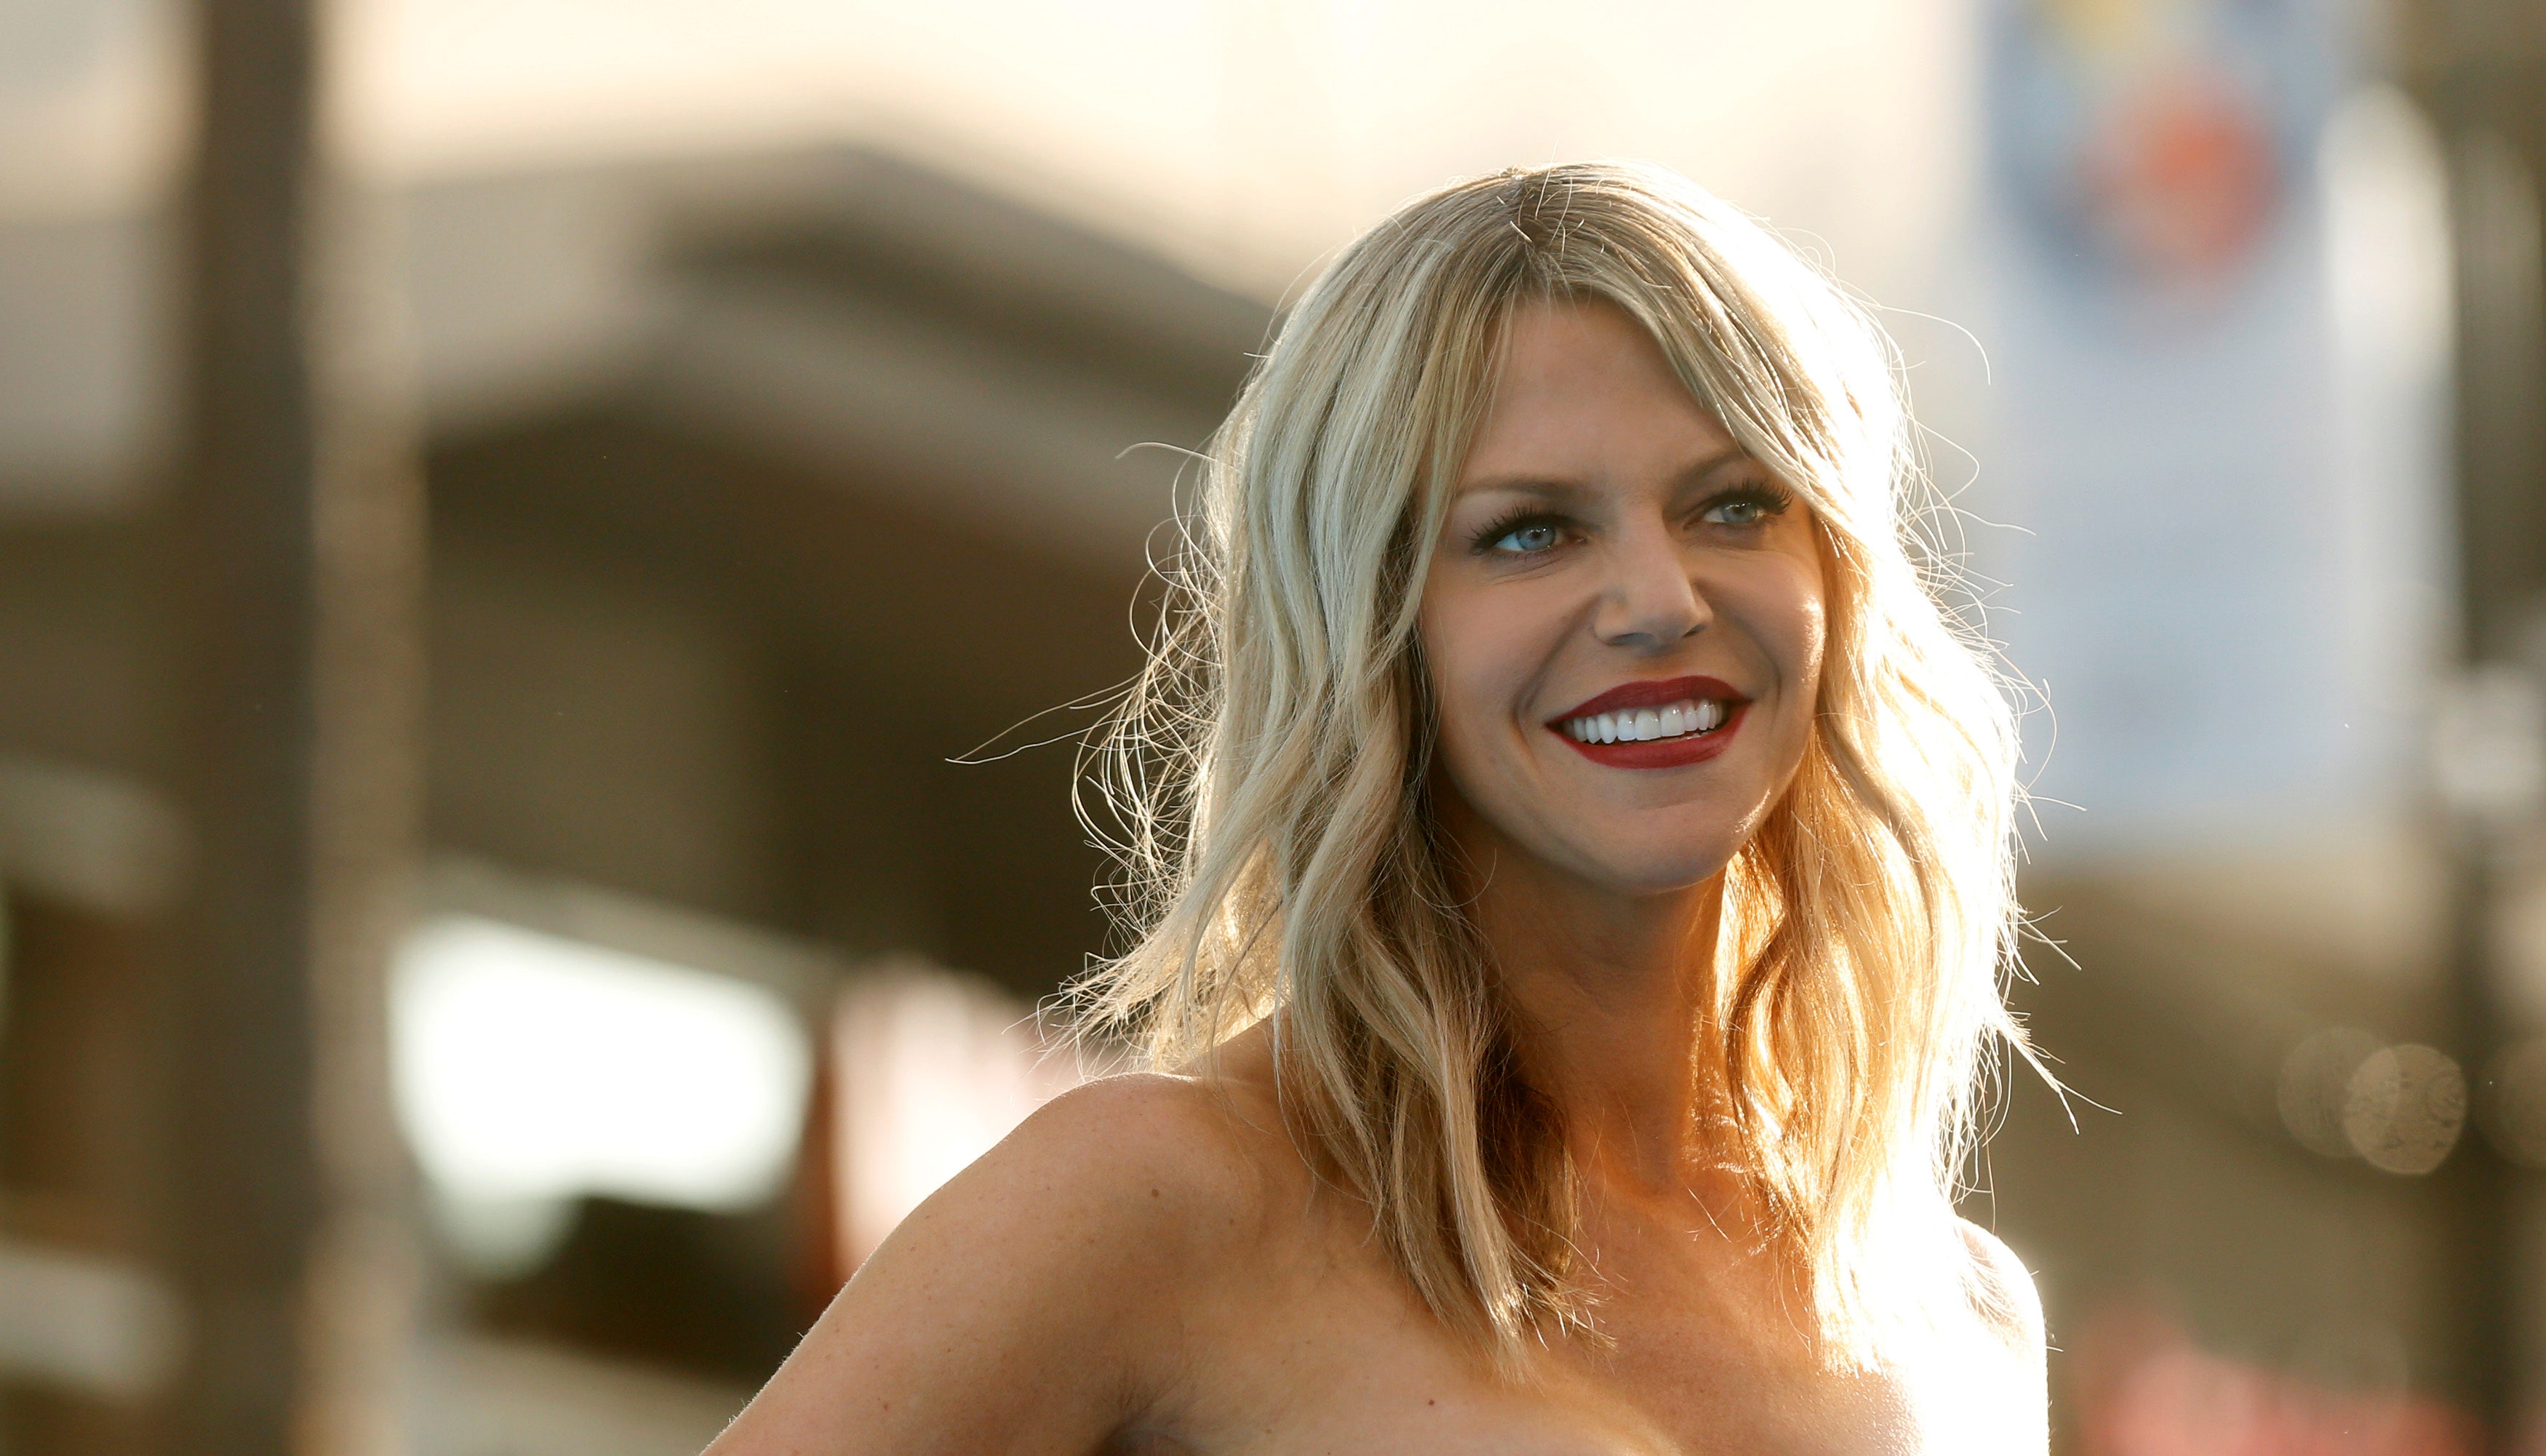 andy wisniewski recommends kaitlin olson nude pics pic